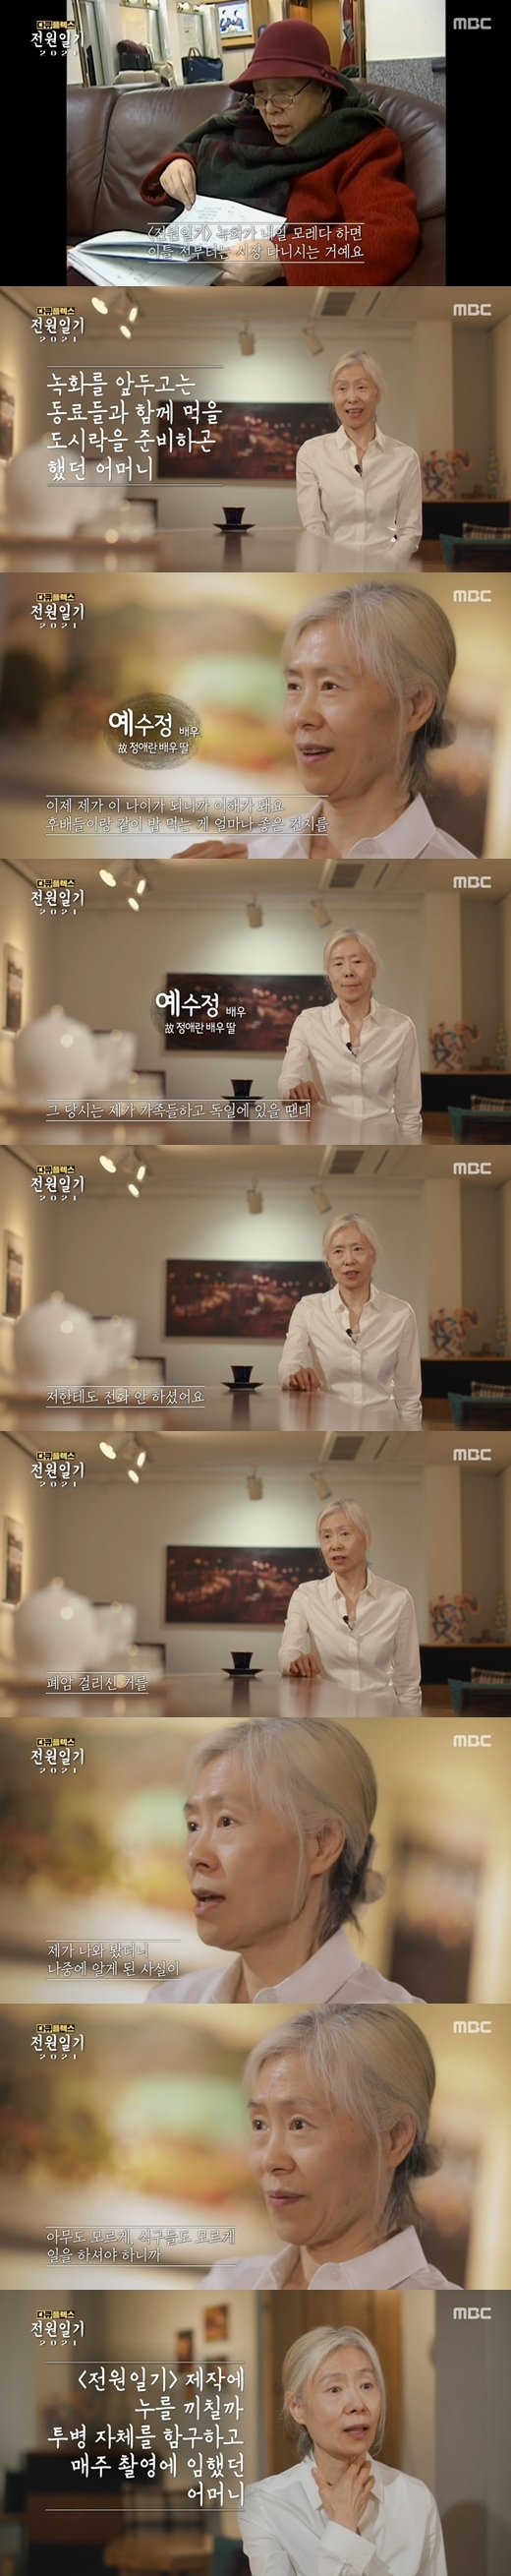 Actor Yeo Su-jeong recalled the late Ae-ran Jeong, Mother and the eternal big adult of the power diary.MBC Document Flex - Power Diary 2021 Part 2 Spring Day Goes broadcast on the 25th, the hidden story of Power Diary which was not known until now was covered.Some failed to join the meeting of the Power Diary Actors, the late Ae-ran Jeong Actor, who died three years after the work ended.Actors gathered in one place recalled the late Ae-ran Jeong Actor, who was a big adult of the work.Yeosu Jeong, daughter of Ae-ran Jeong, told the production team: Two days before the recording of Power Diary, my mother used to go to the market all the time, to pack lunches with her juniors.I understand how good it is to eat with my juniors. Yeosu Jung said, My mother did not tell me that she was living in Germany at the time of lung cancer.But later, I found out that I was hospitalized alone for two nights and three days without anyone knowing that I was going to work, and then I took a power diary shot.